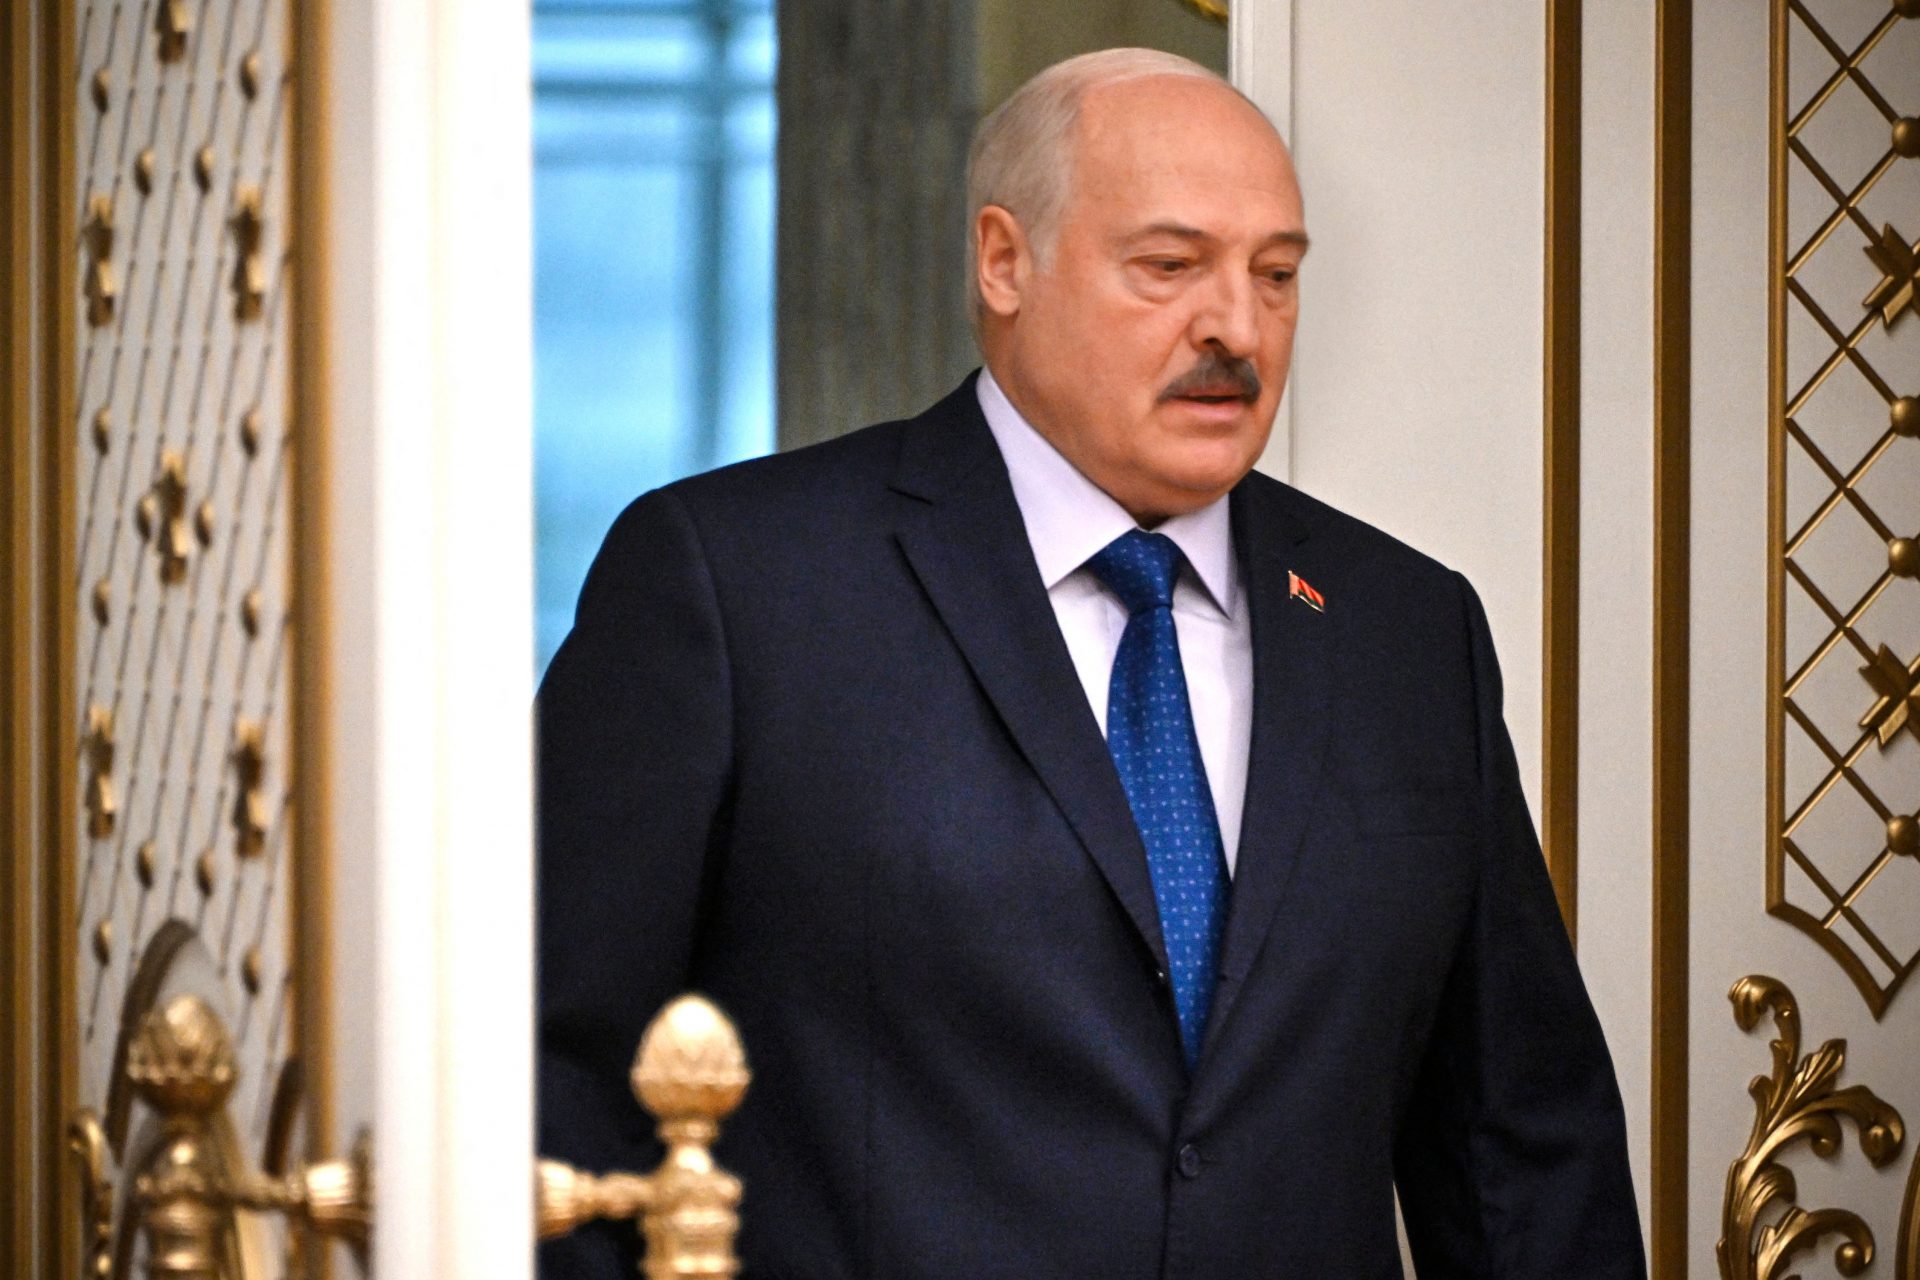 Repeated provocations from Belarus